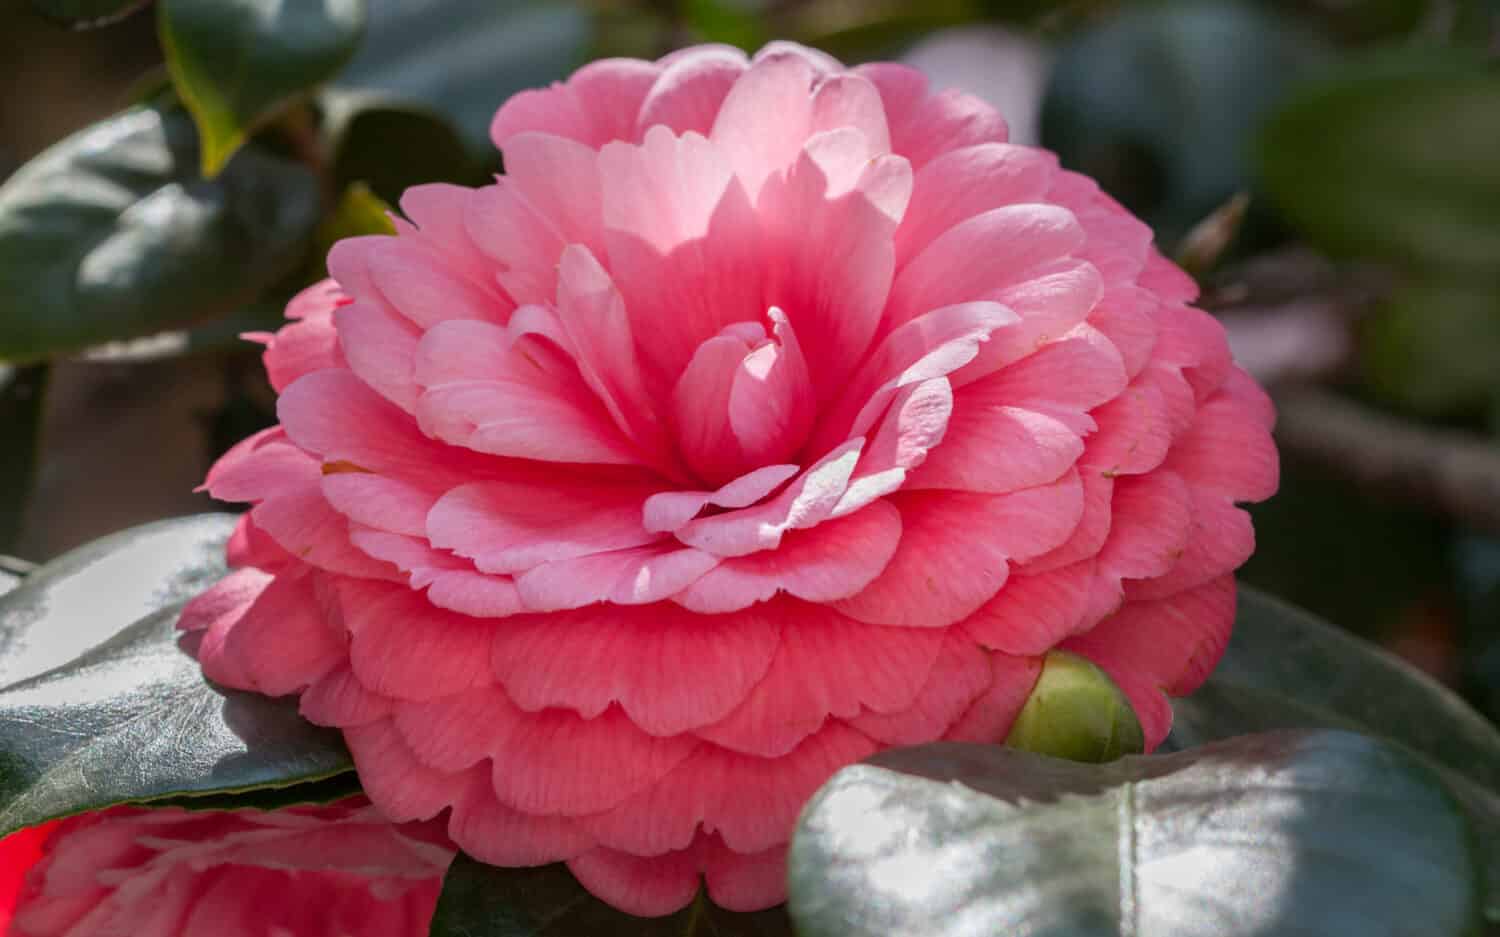 Middlemist Camelia-The rare plant, brought to Britain from China